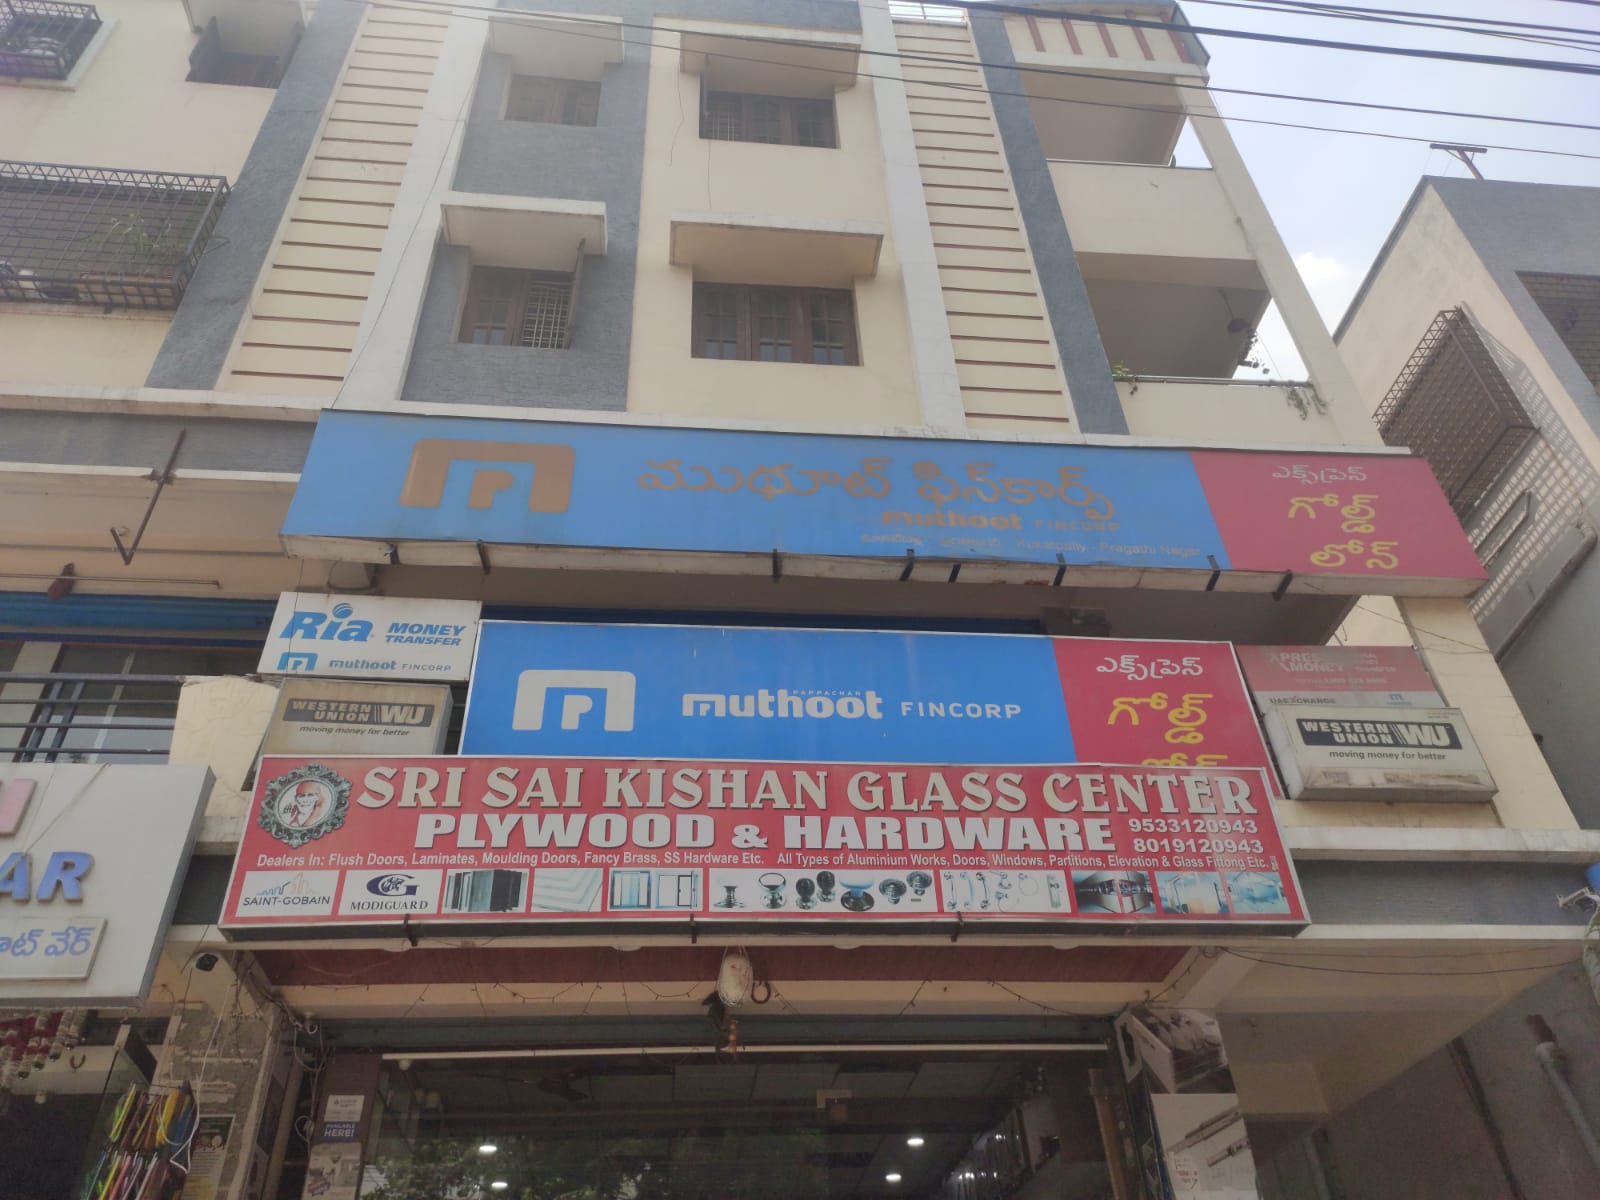 Photos and Videos of Muthoot Fincorp Gold Loan in Pragathinagar, Rangareddy